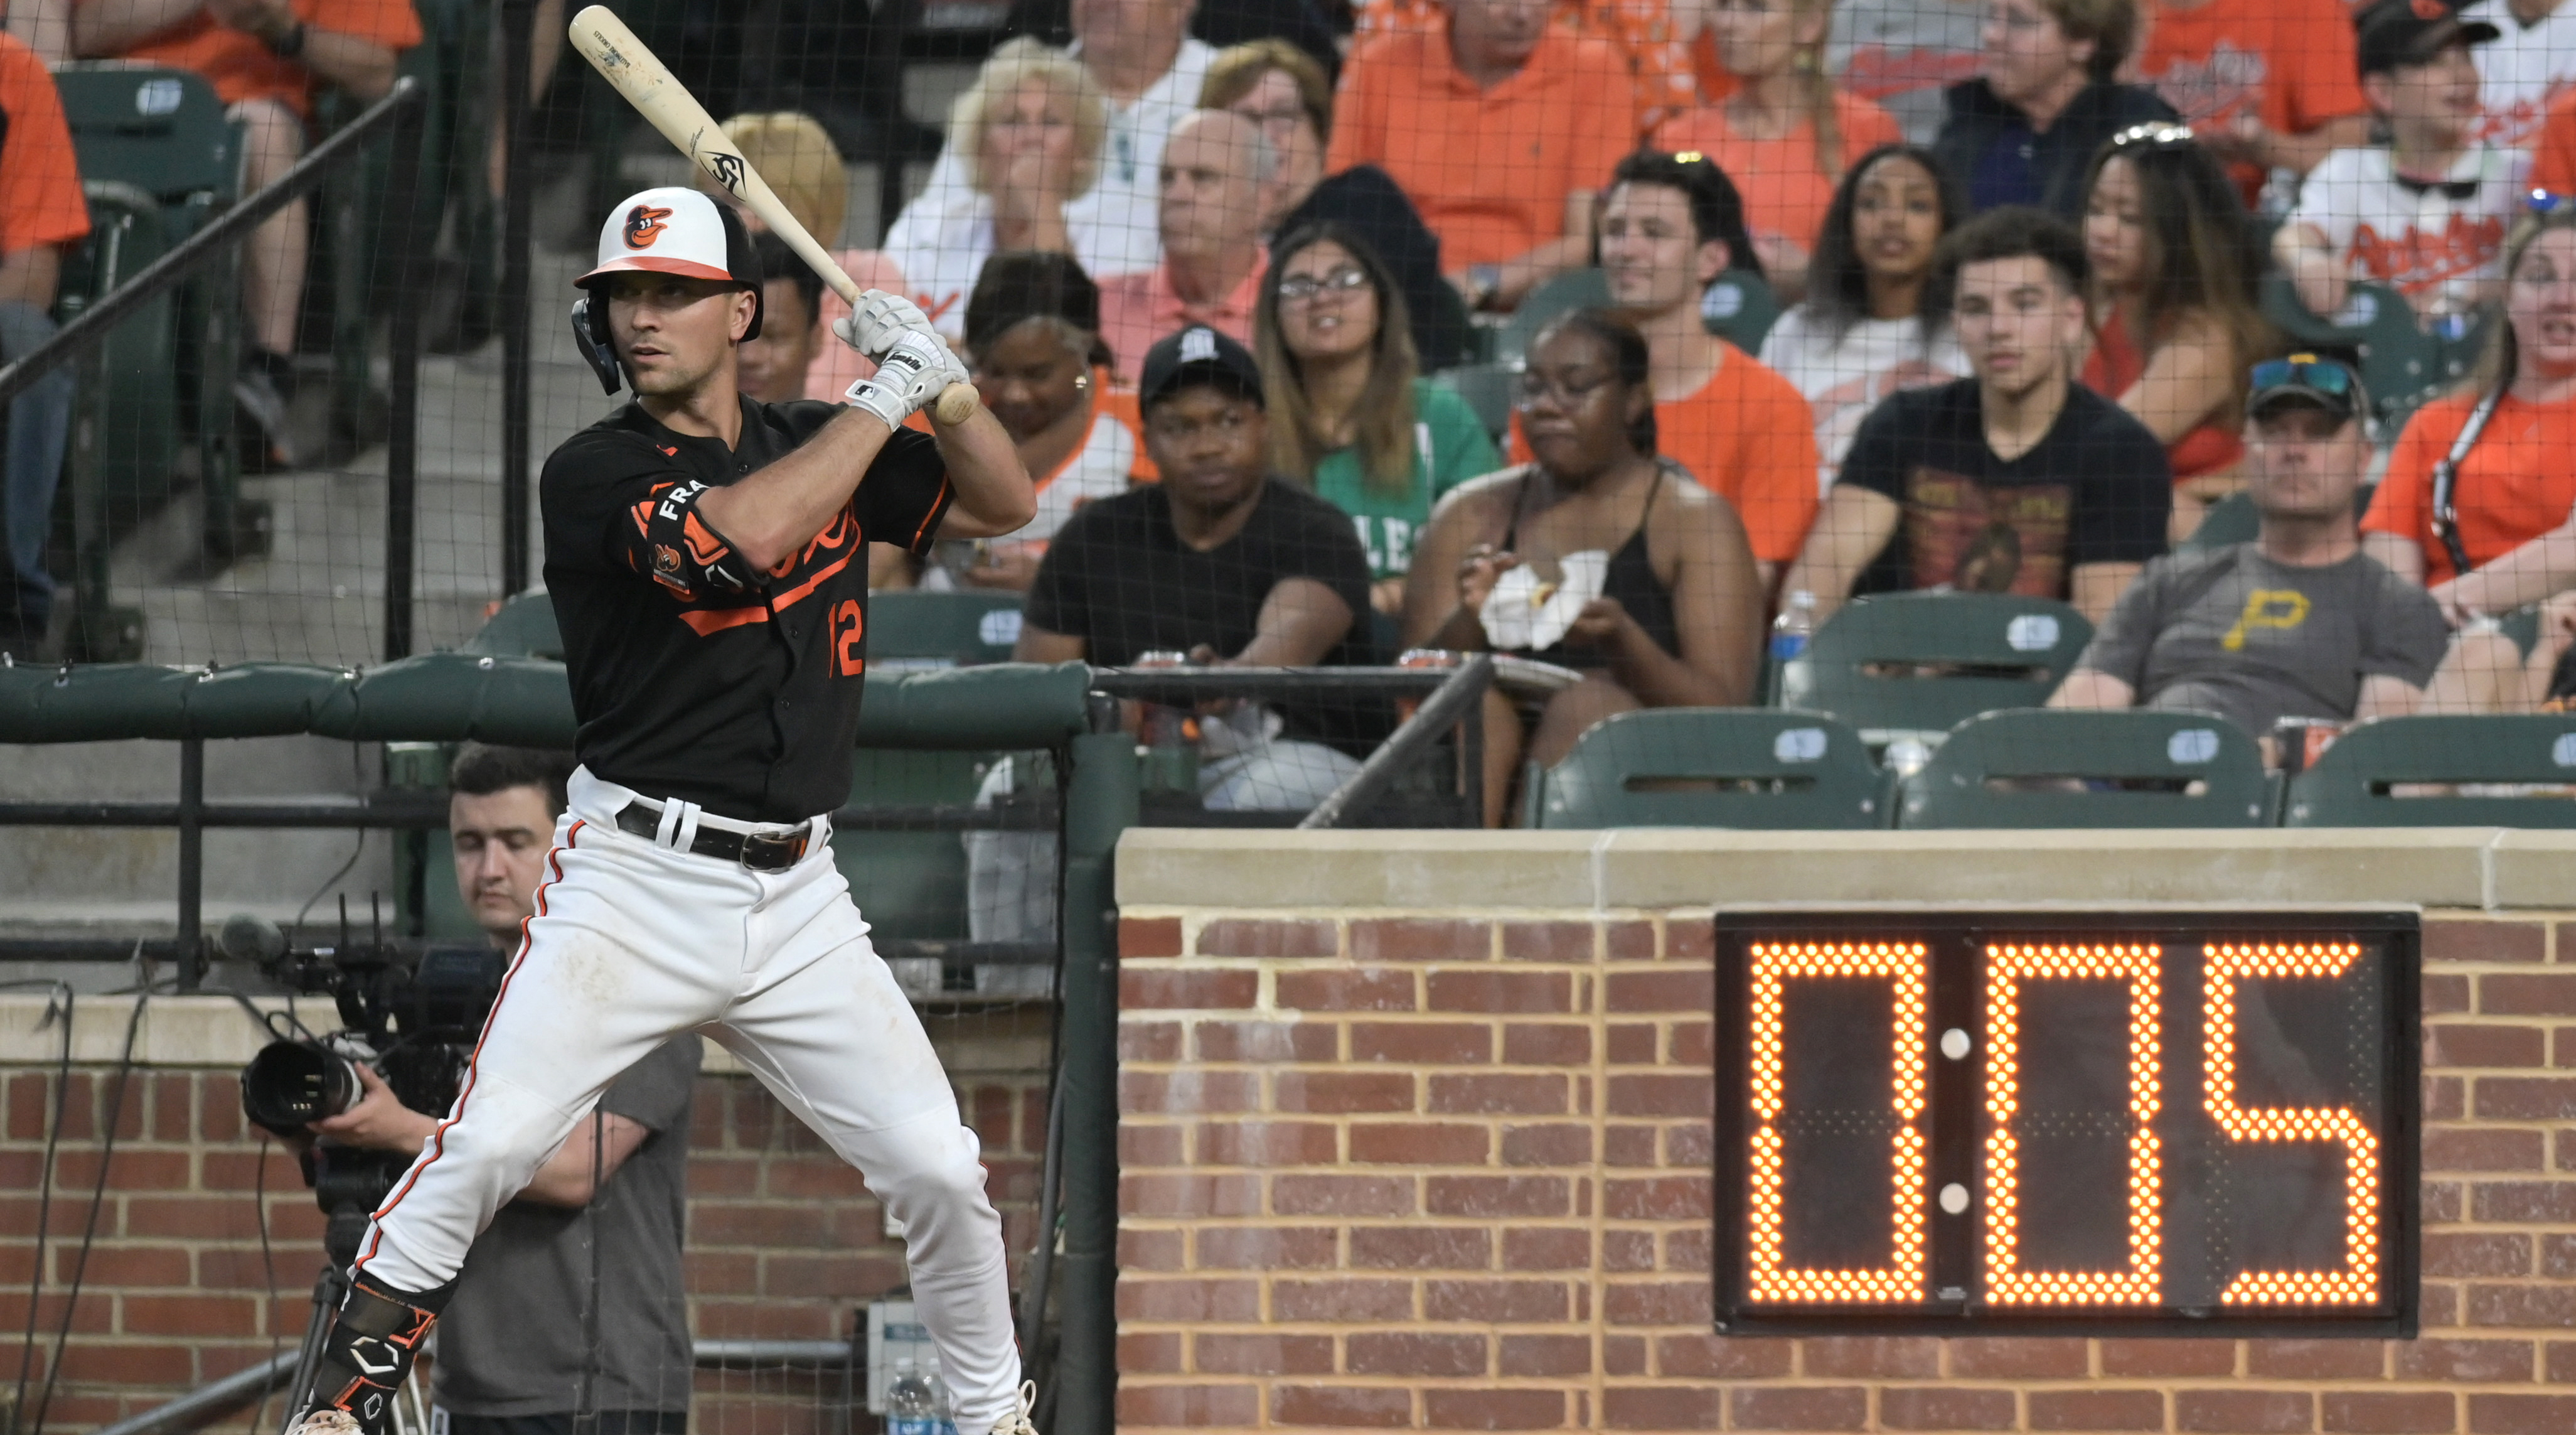 Baltimore Orioles second baseman Adam Frazier warms up next to the pitch clock during at Oriole Park at Camden Yards.